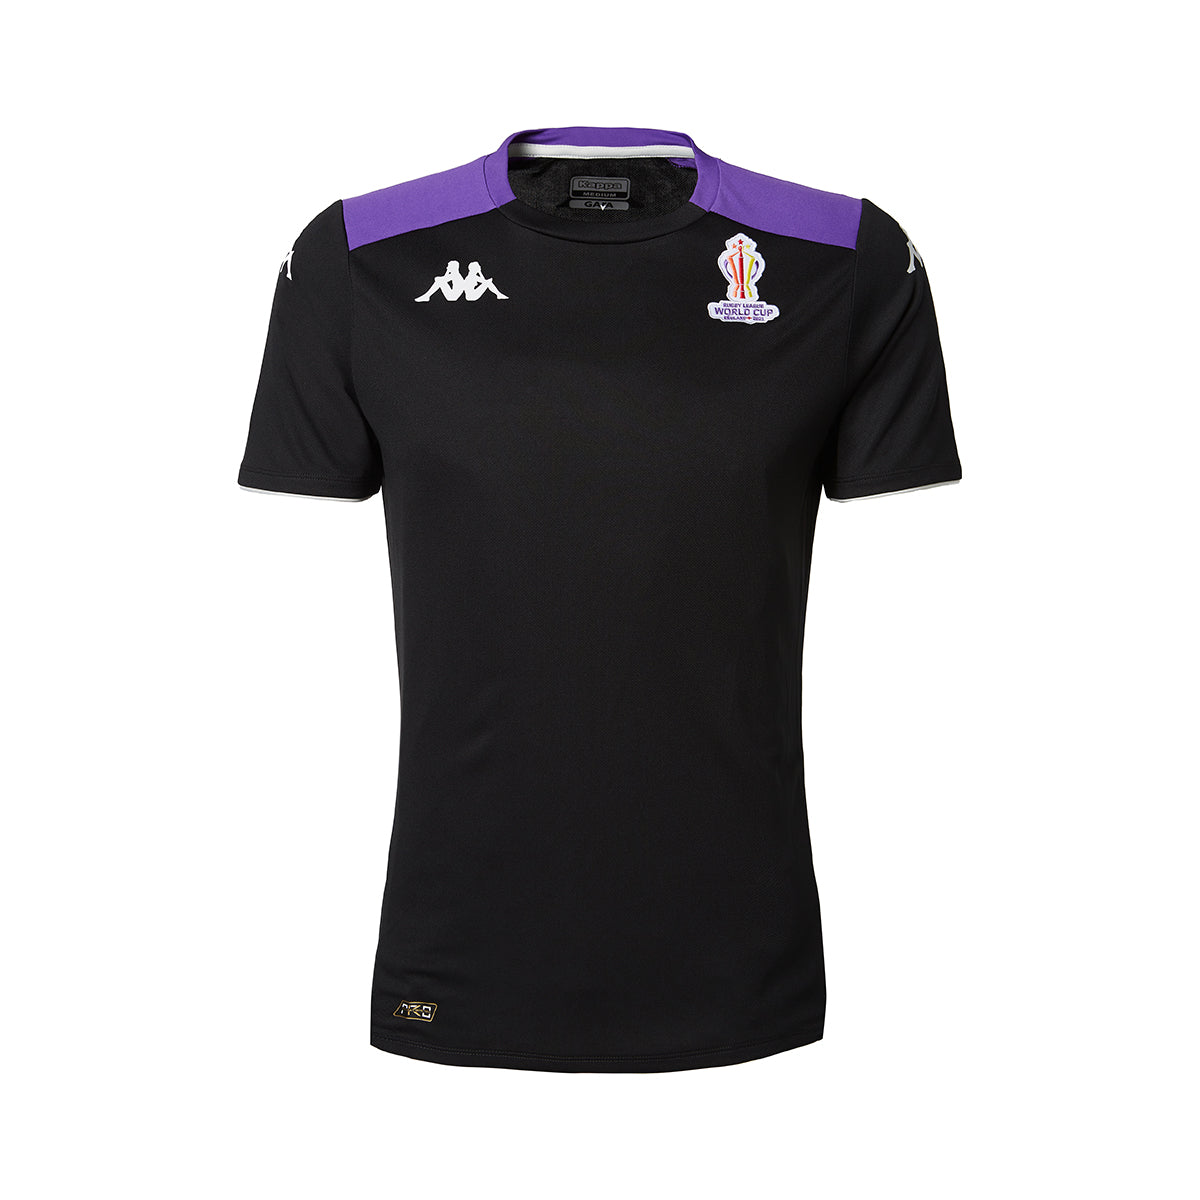 Maillot Abou Pro 5 Rugby World Cup Noir homme - image 1